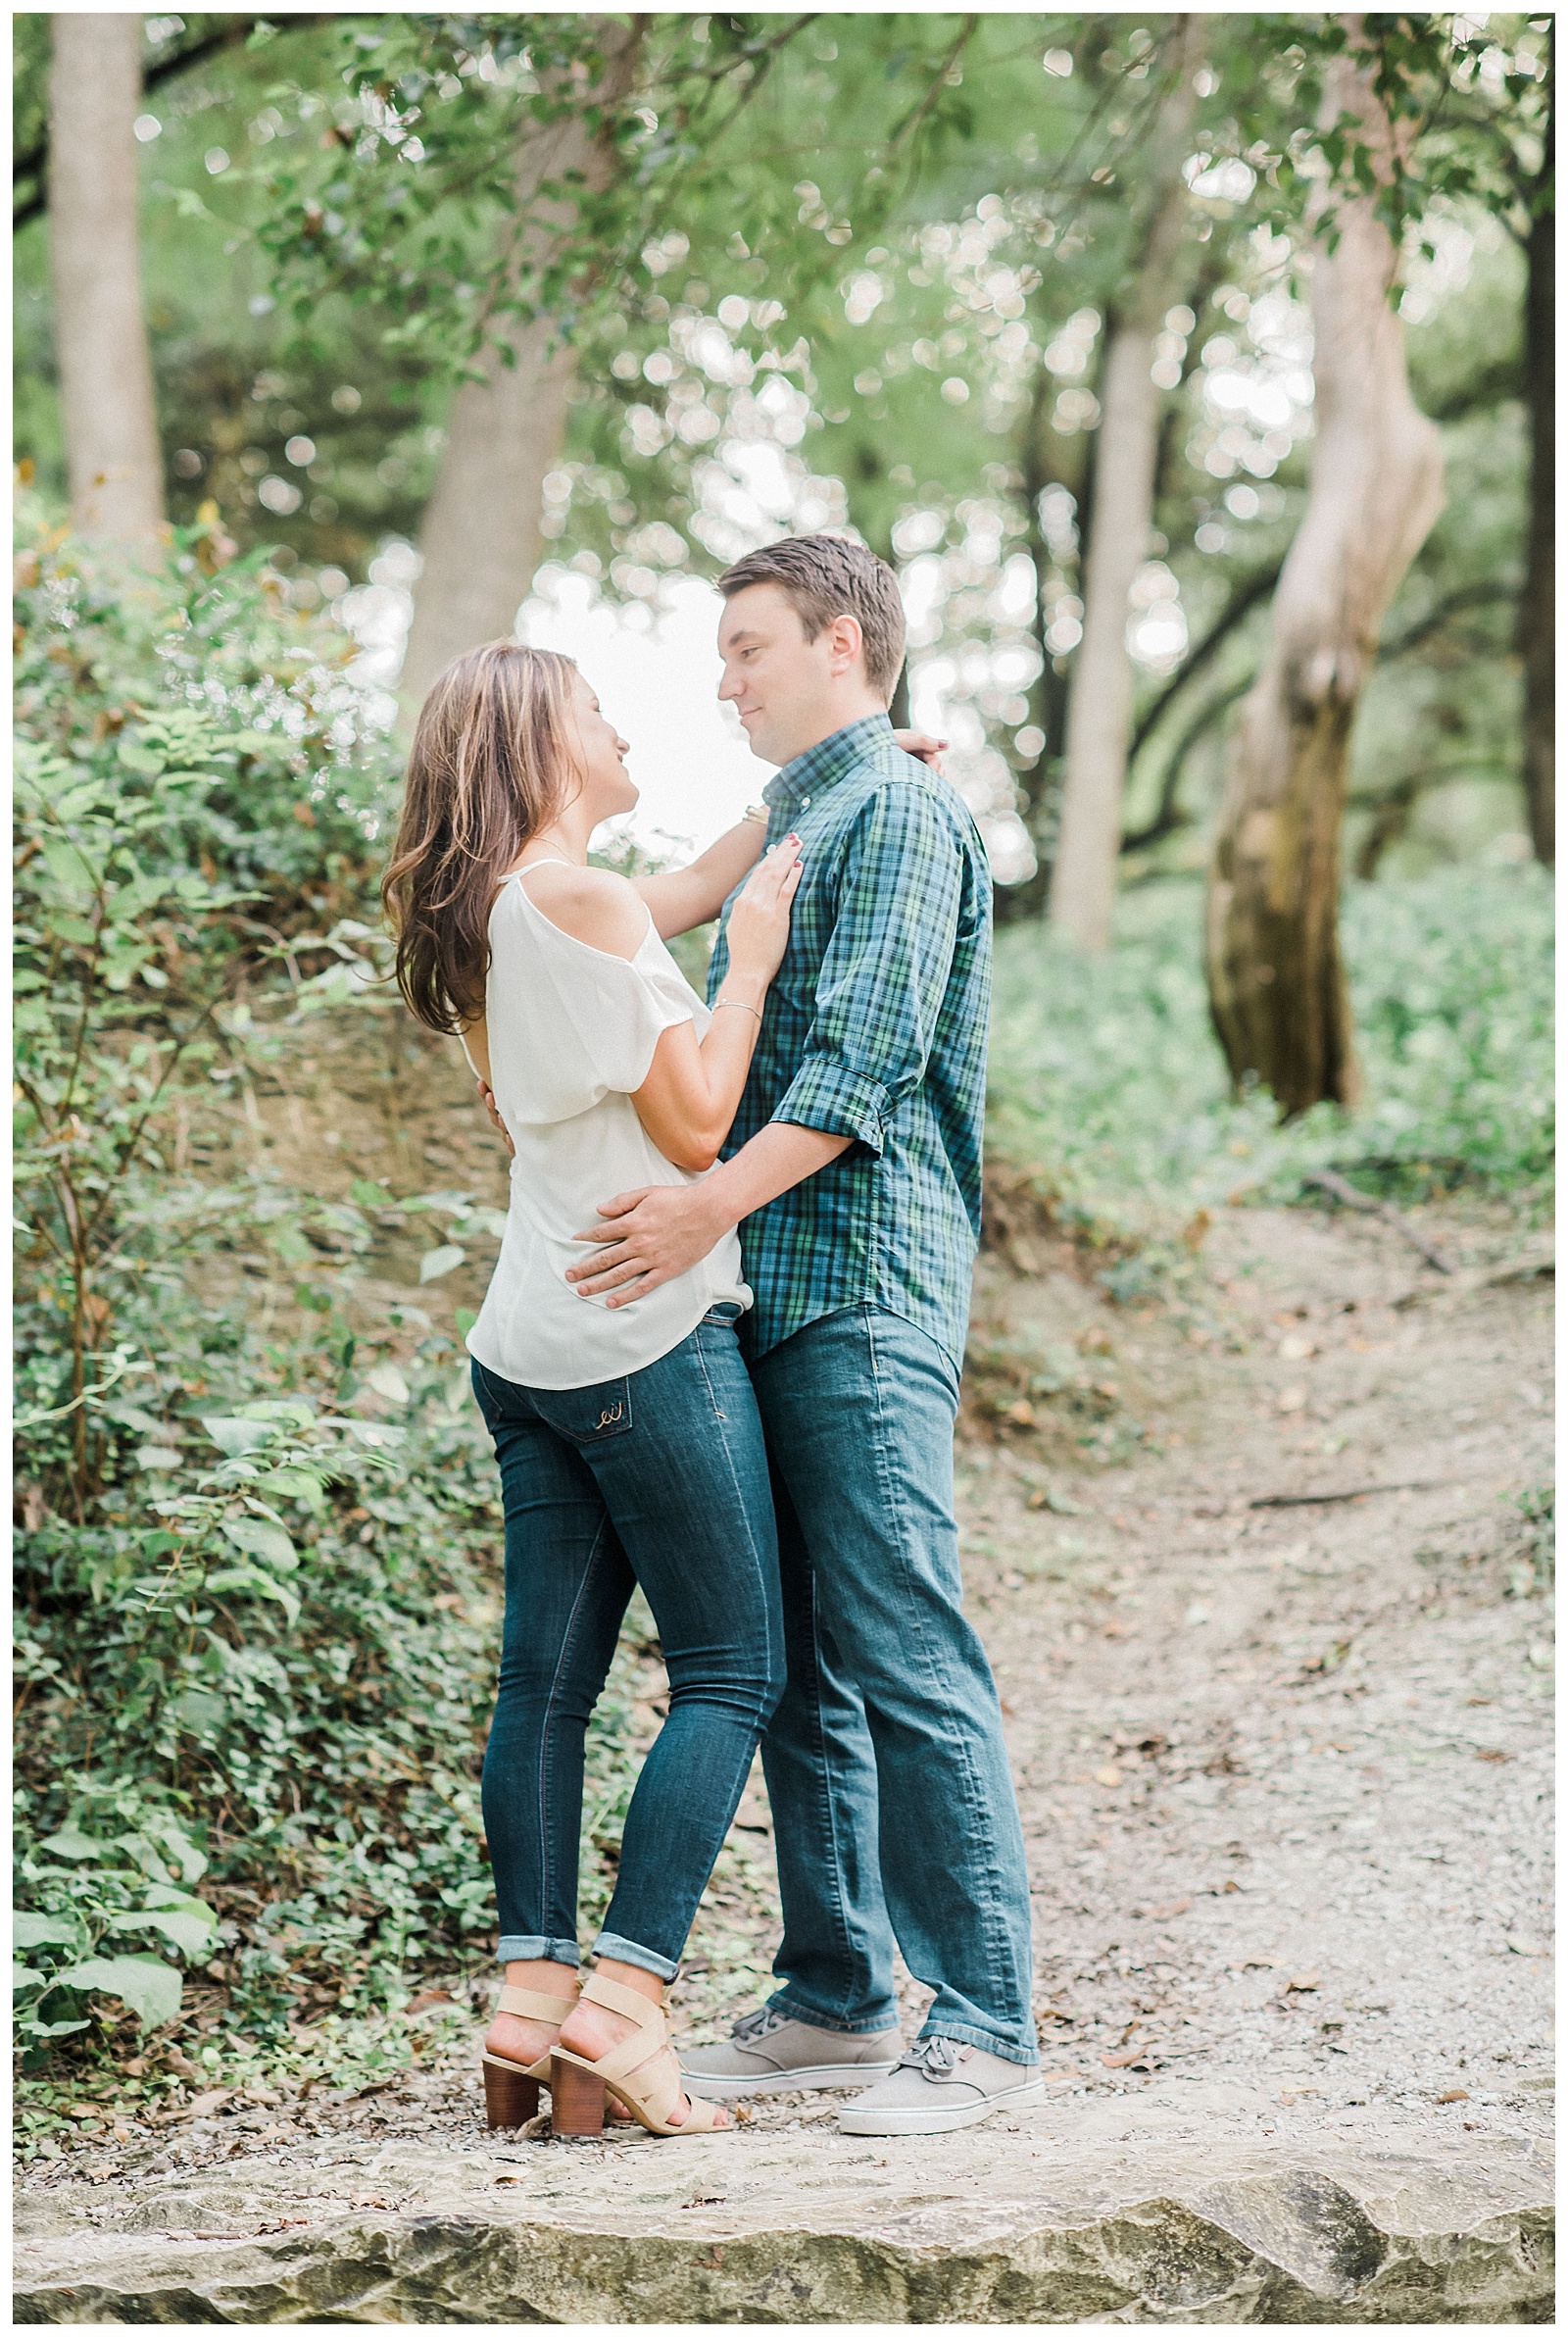 Romantic ethereal engagement session in Dallas - Alba Rose Photography